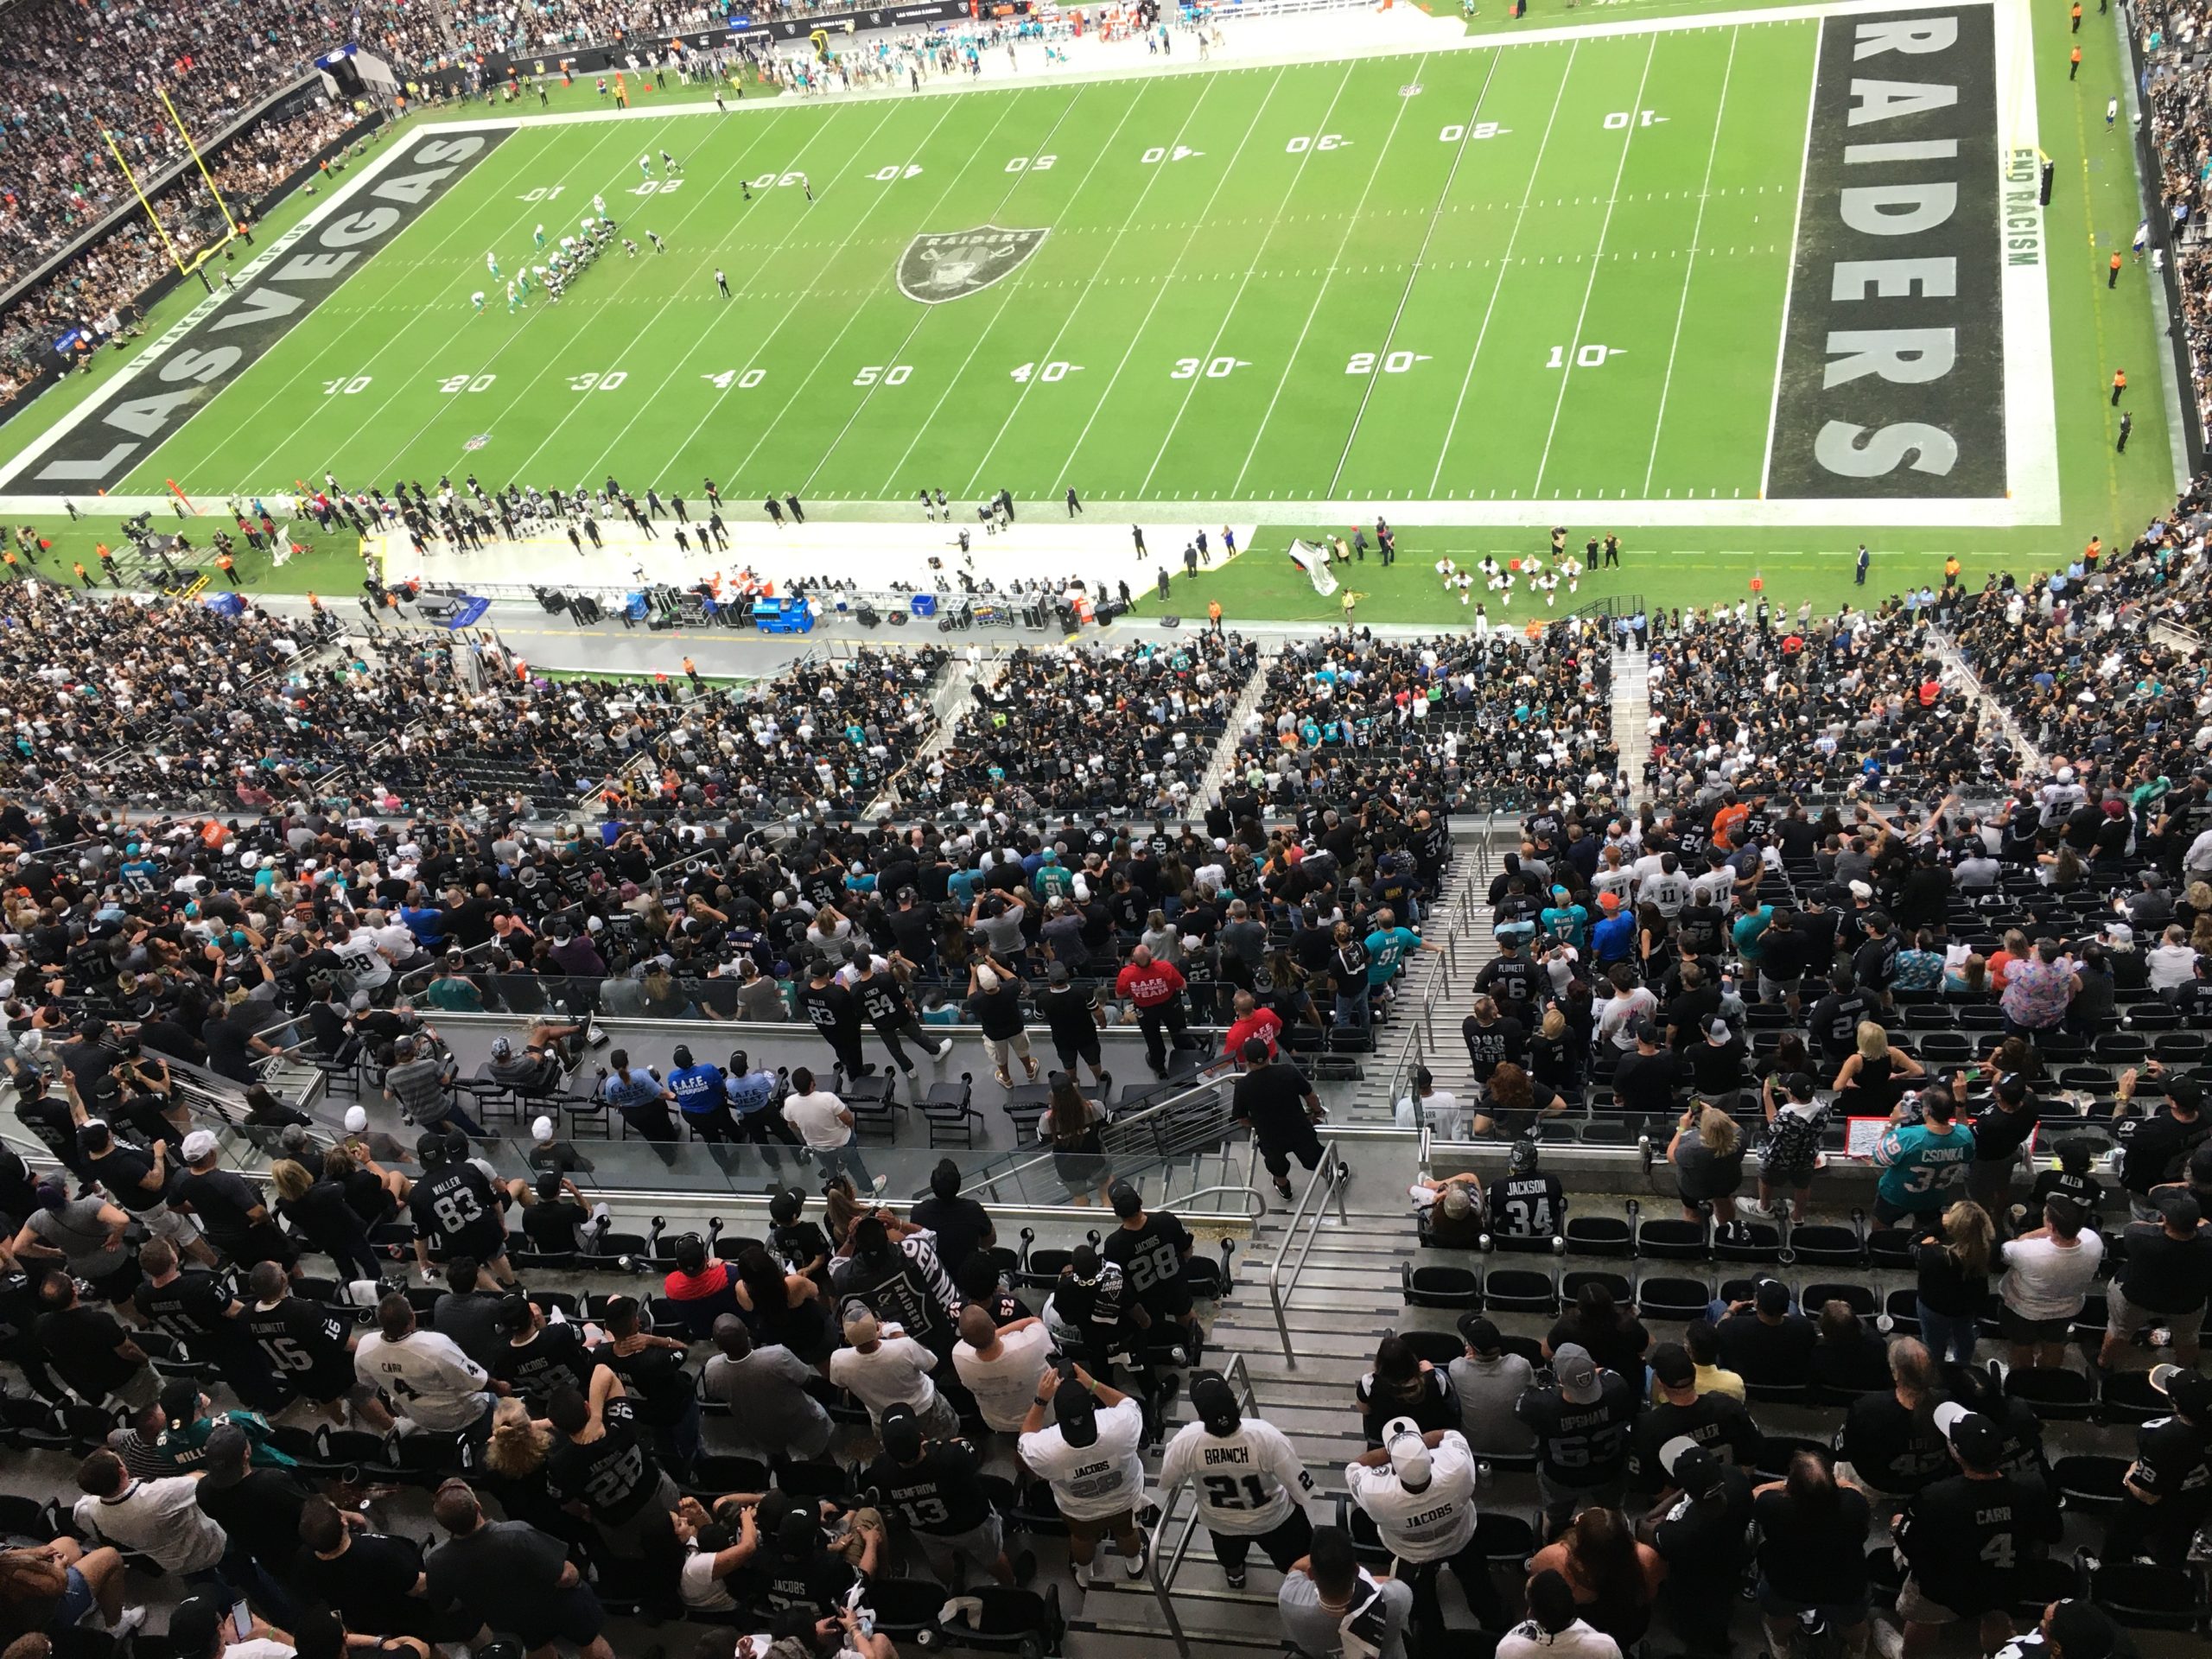 Raiders Fans Renew Weekend Rite Of Visiting New Stadium With